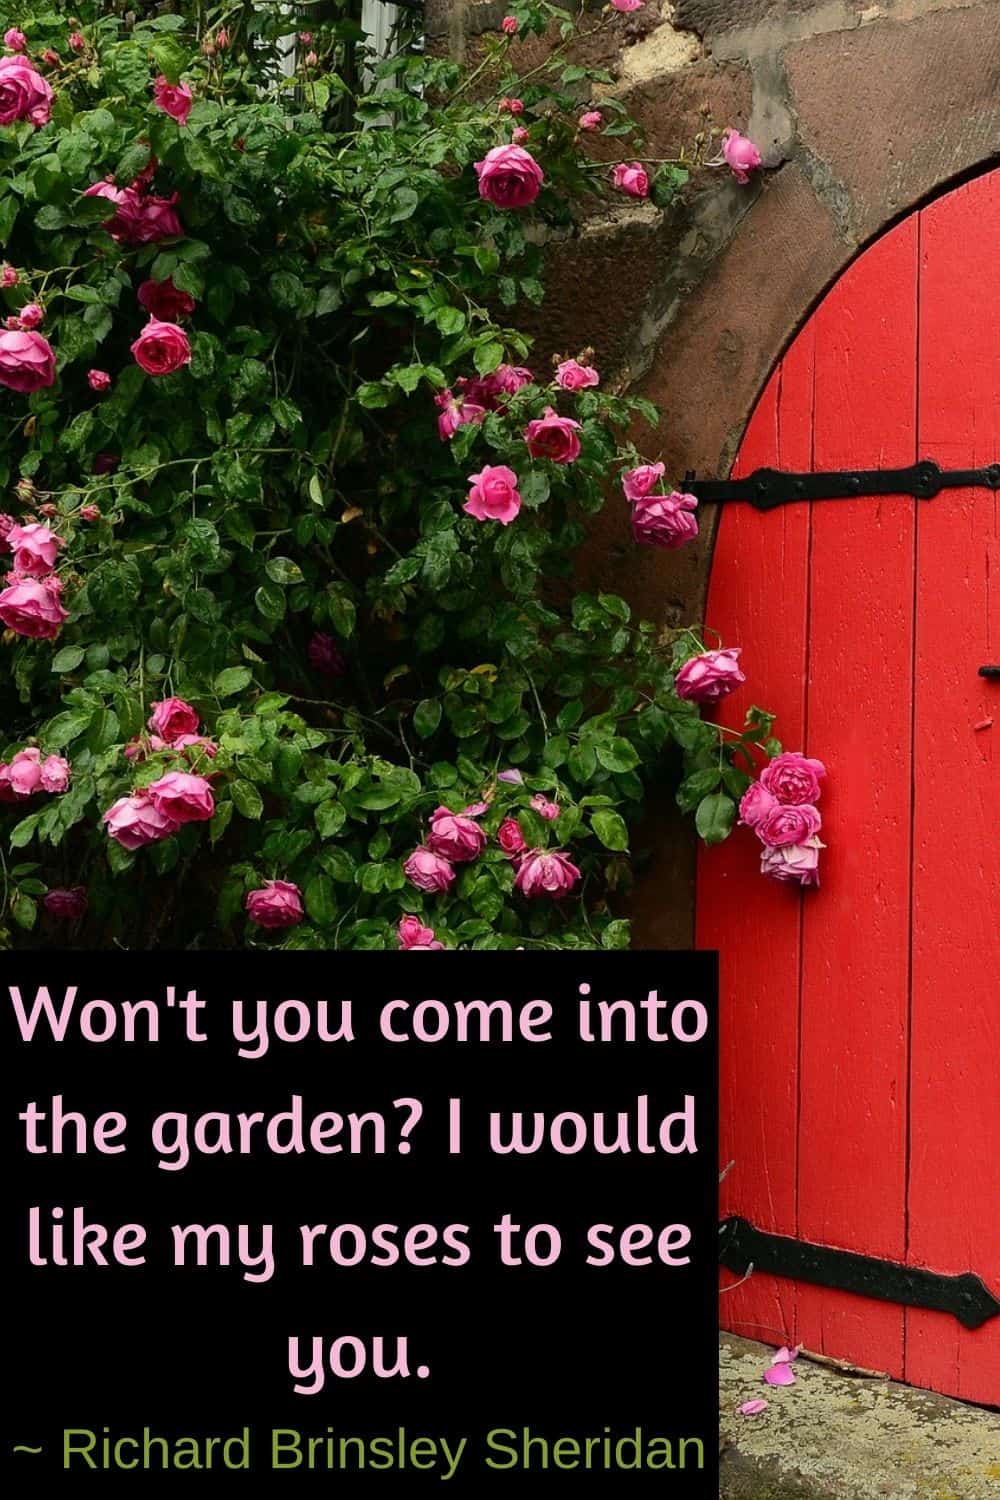 Won't you come into the garden? I would like my roses to see you.